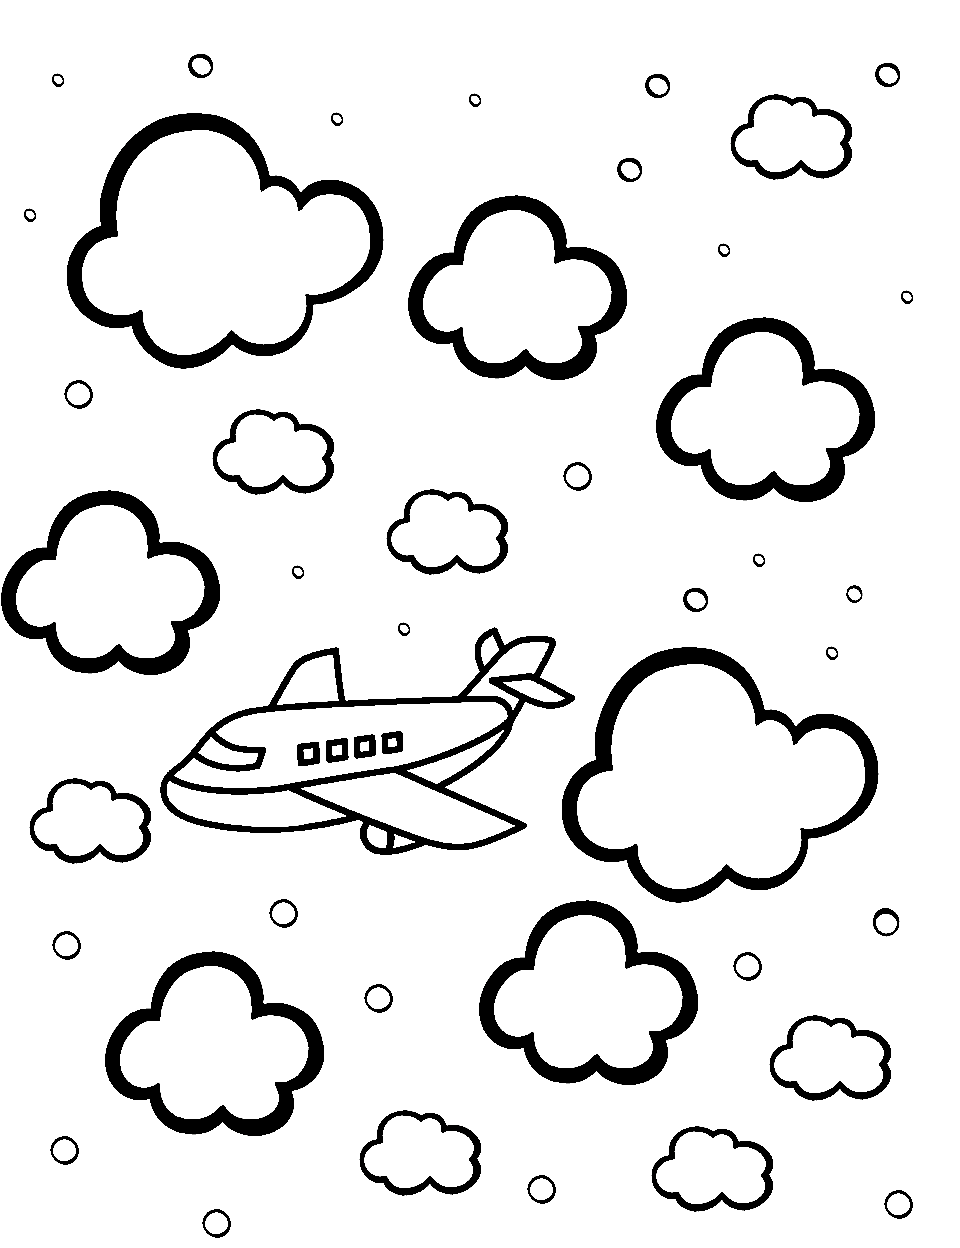 Playful Cloud Shapes Airplane Coloring Page - Various playful cloud shapes surrounding a small, cartoonish airplane.